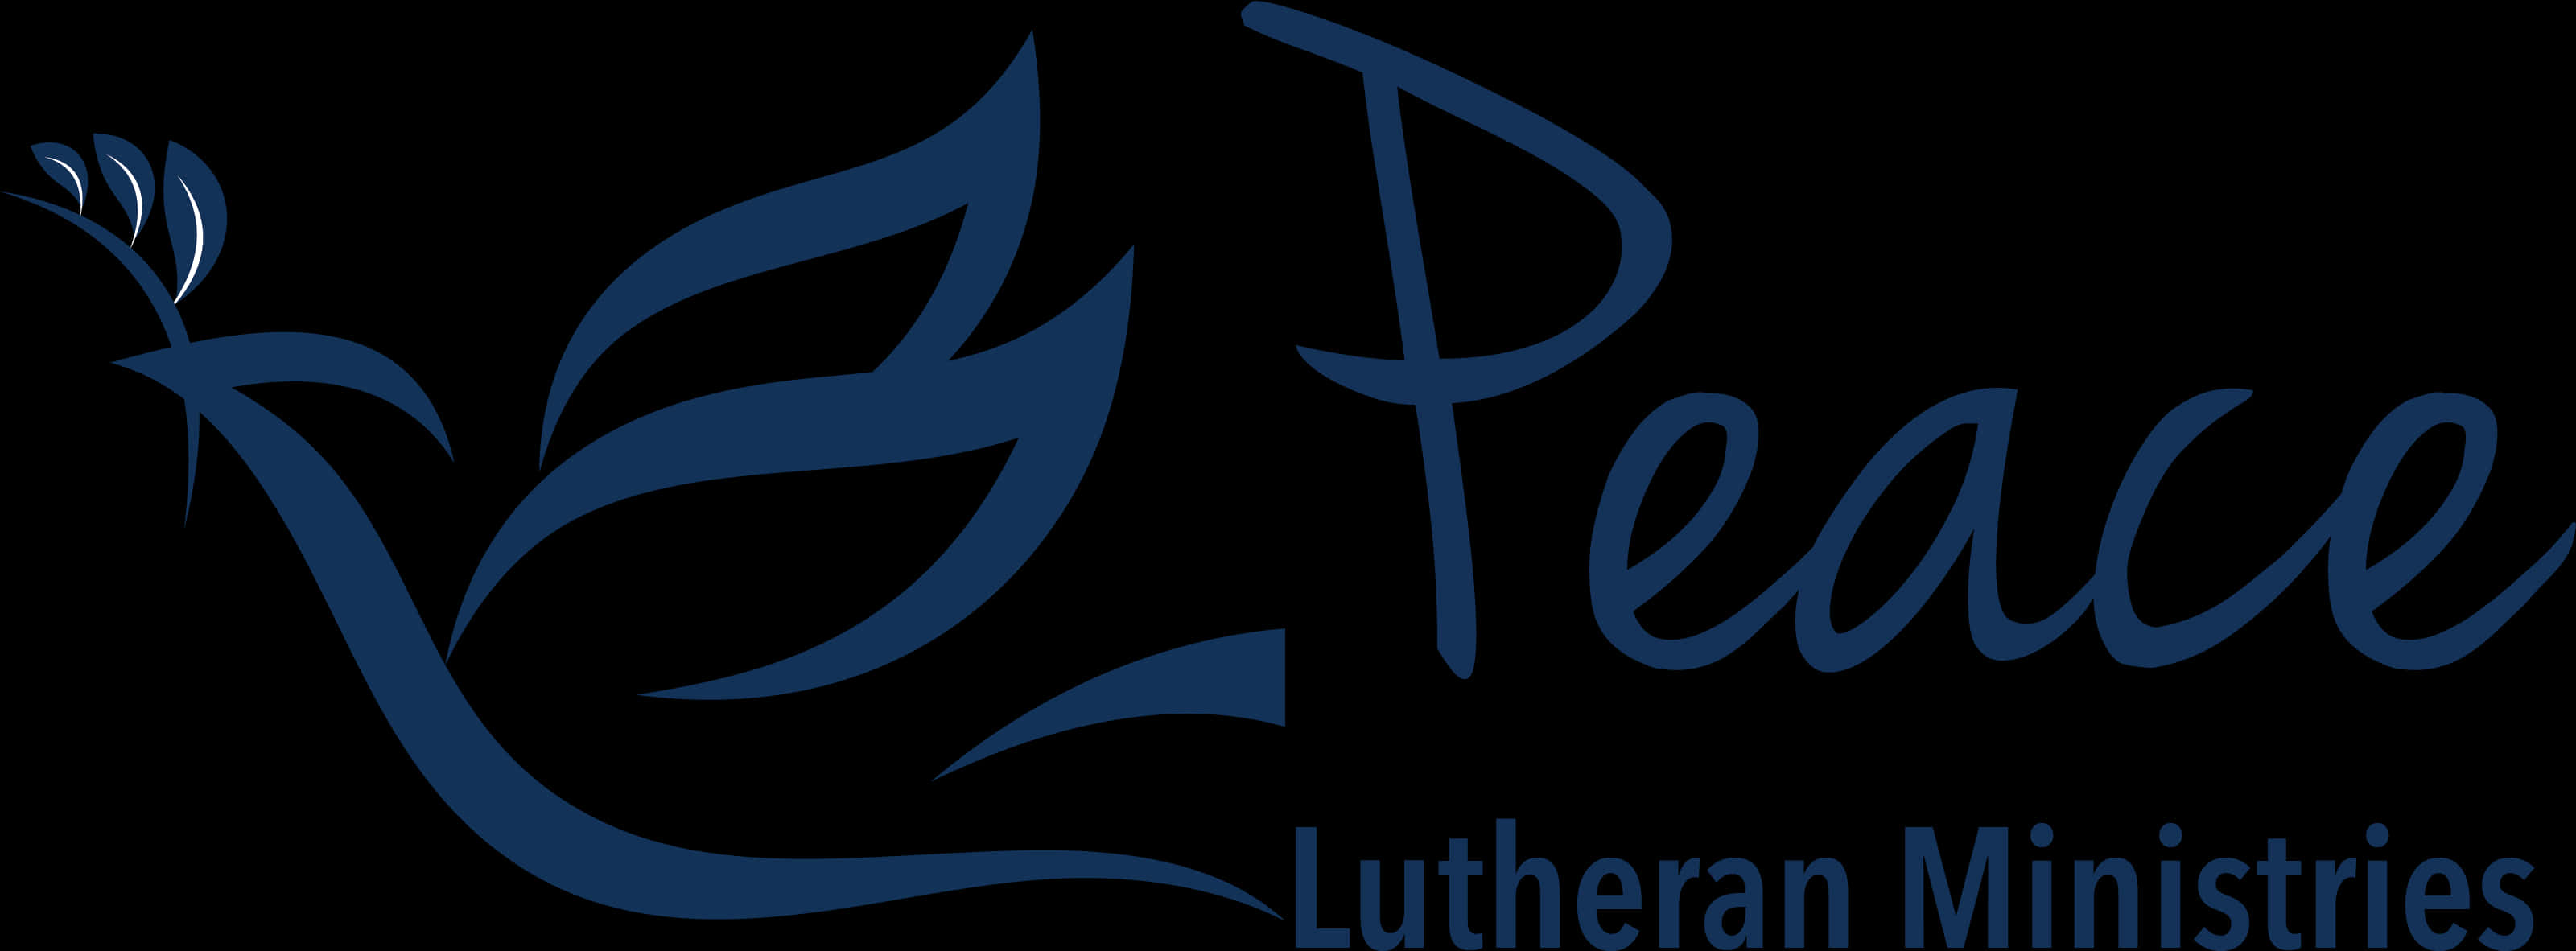 Peace Lutheran Ministries Logowith Dove PNG image